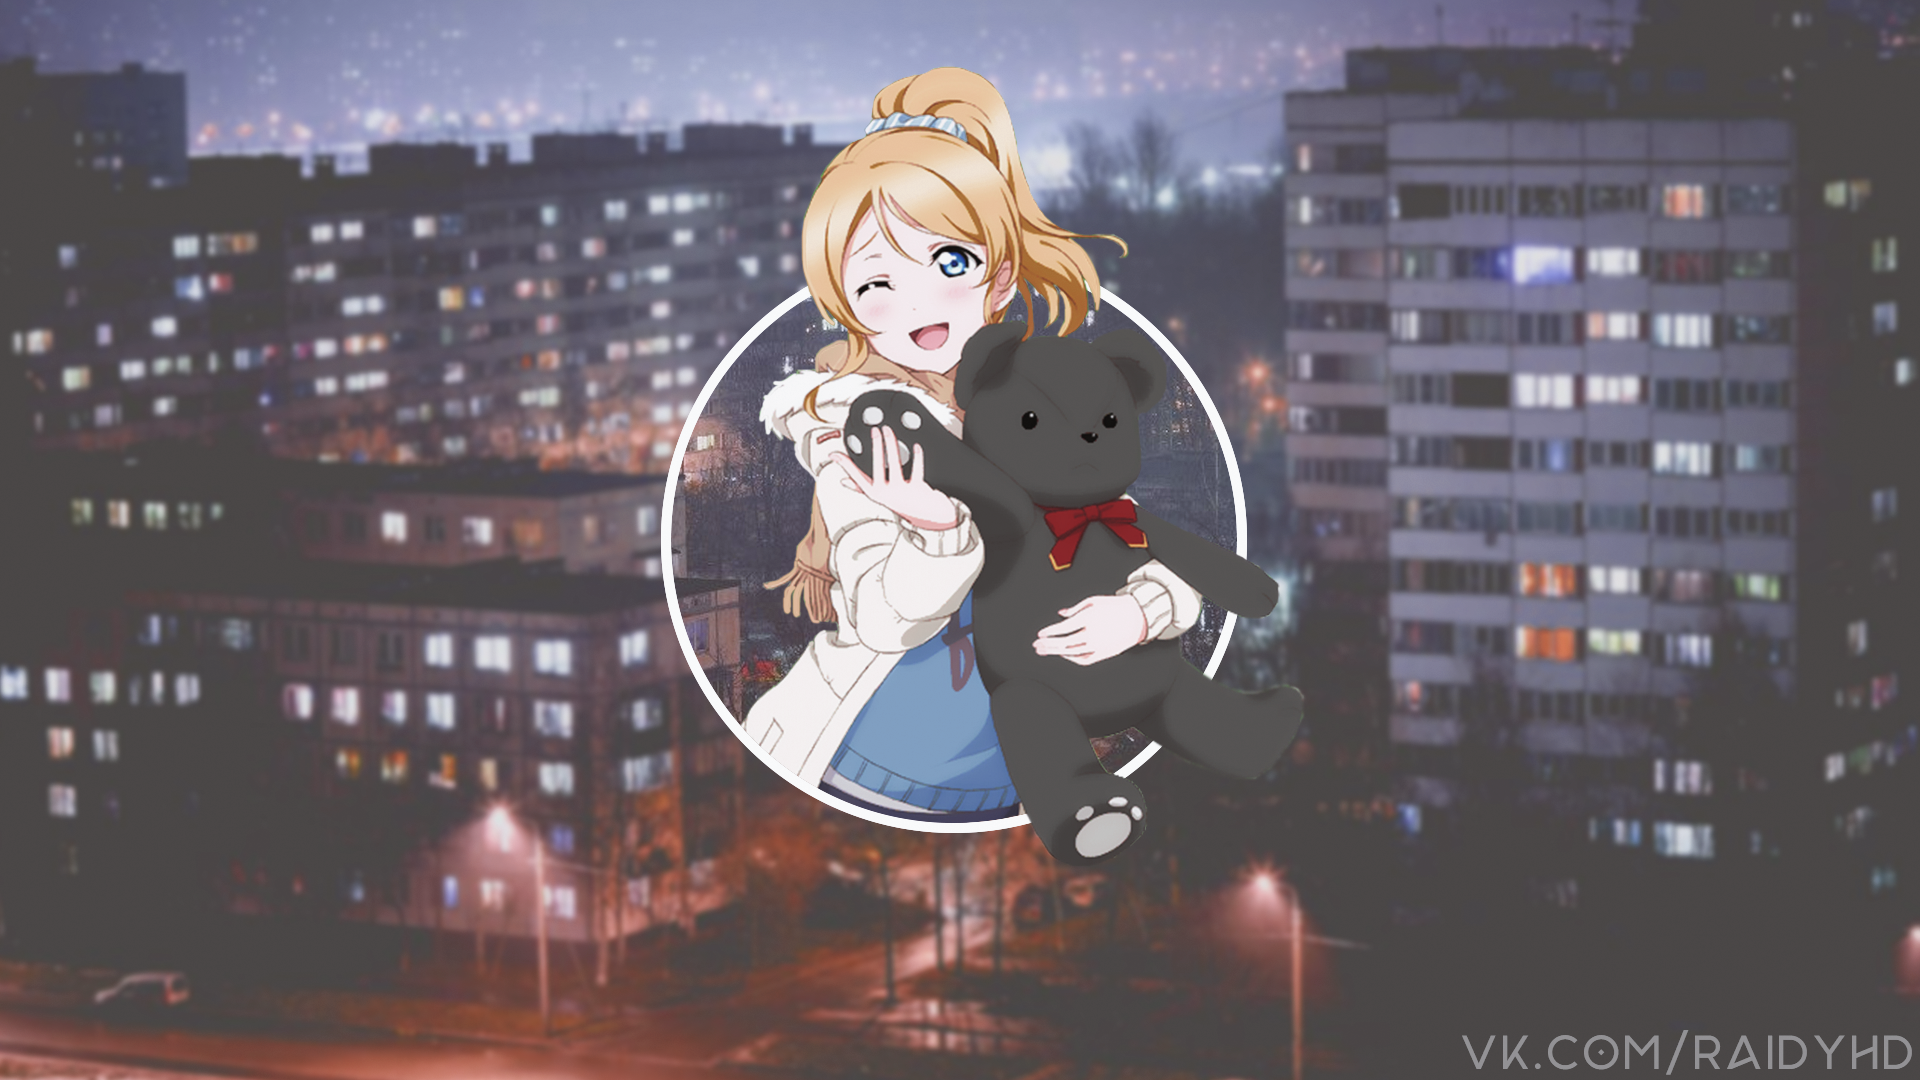 Anime 1920x1080 anime anime girls picture-in-picture Love Live! Ayase Eli watermarked teddy bears plush toy one eye closed open mouth happy blonde cityscape